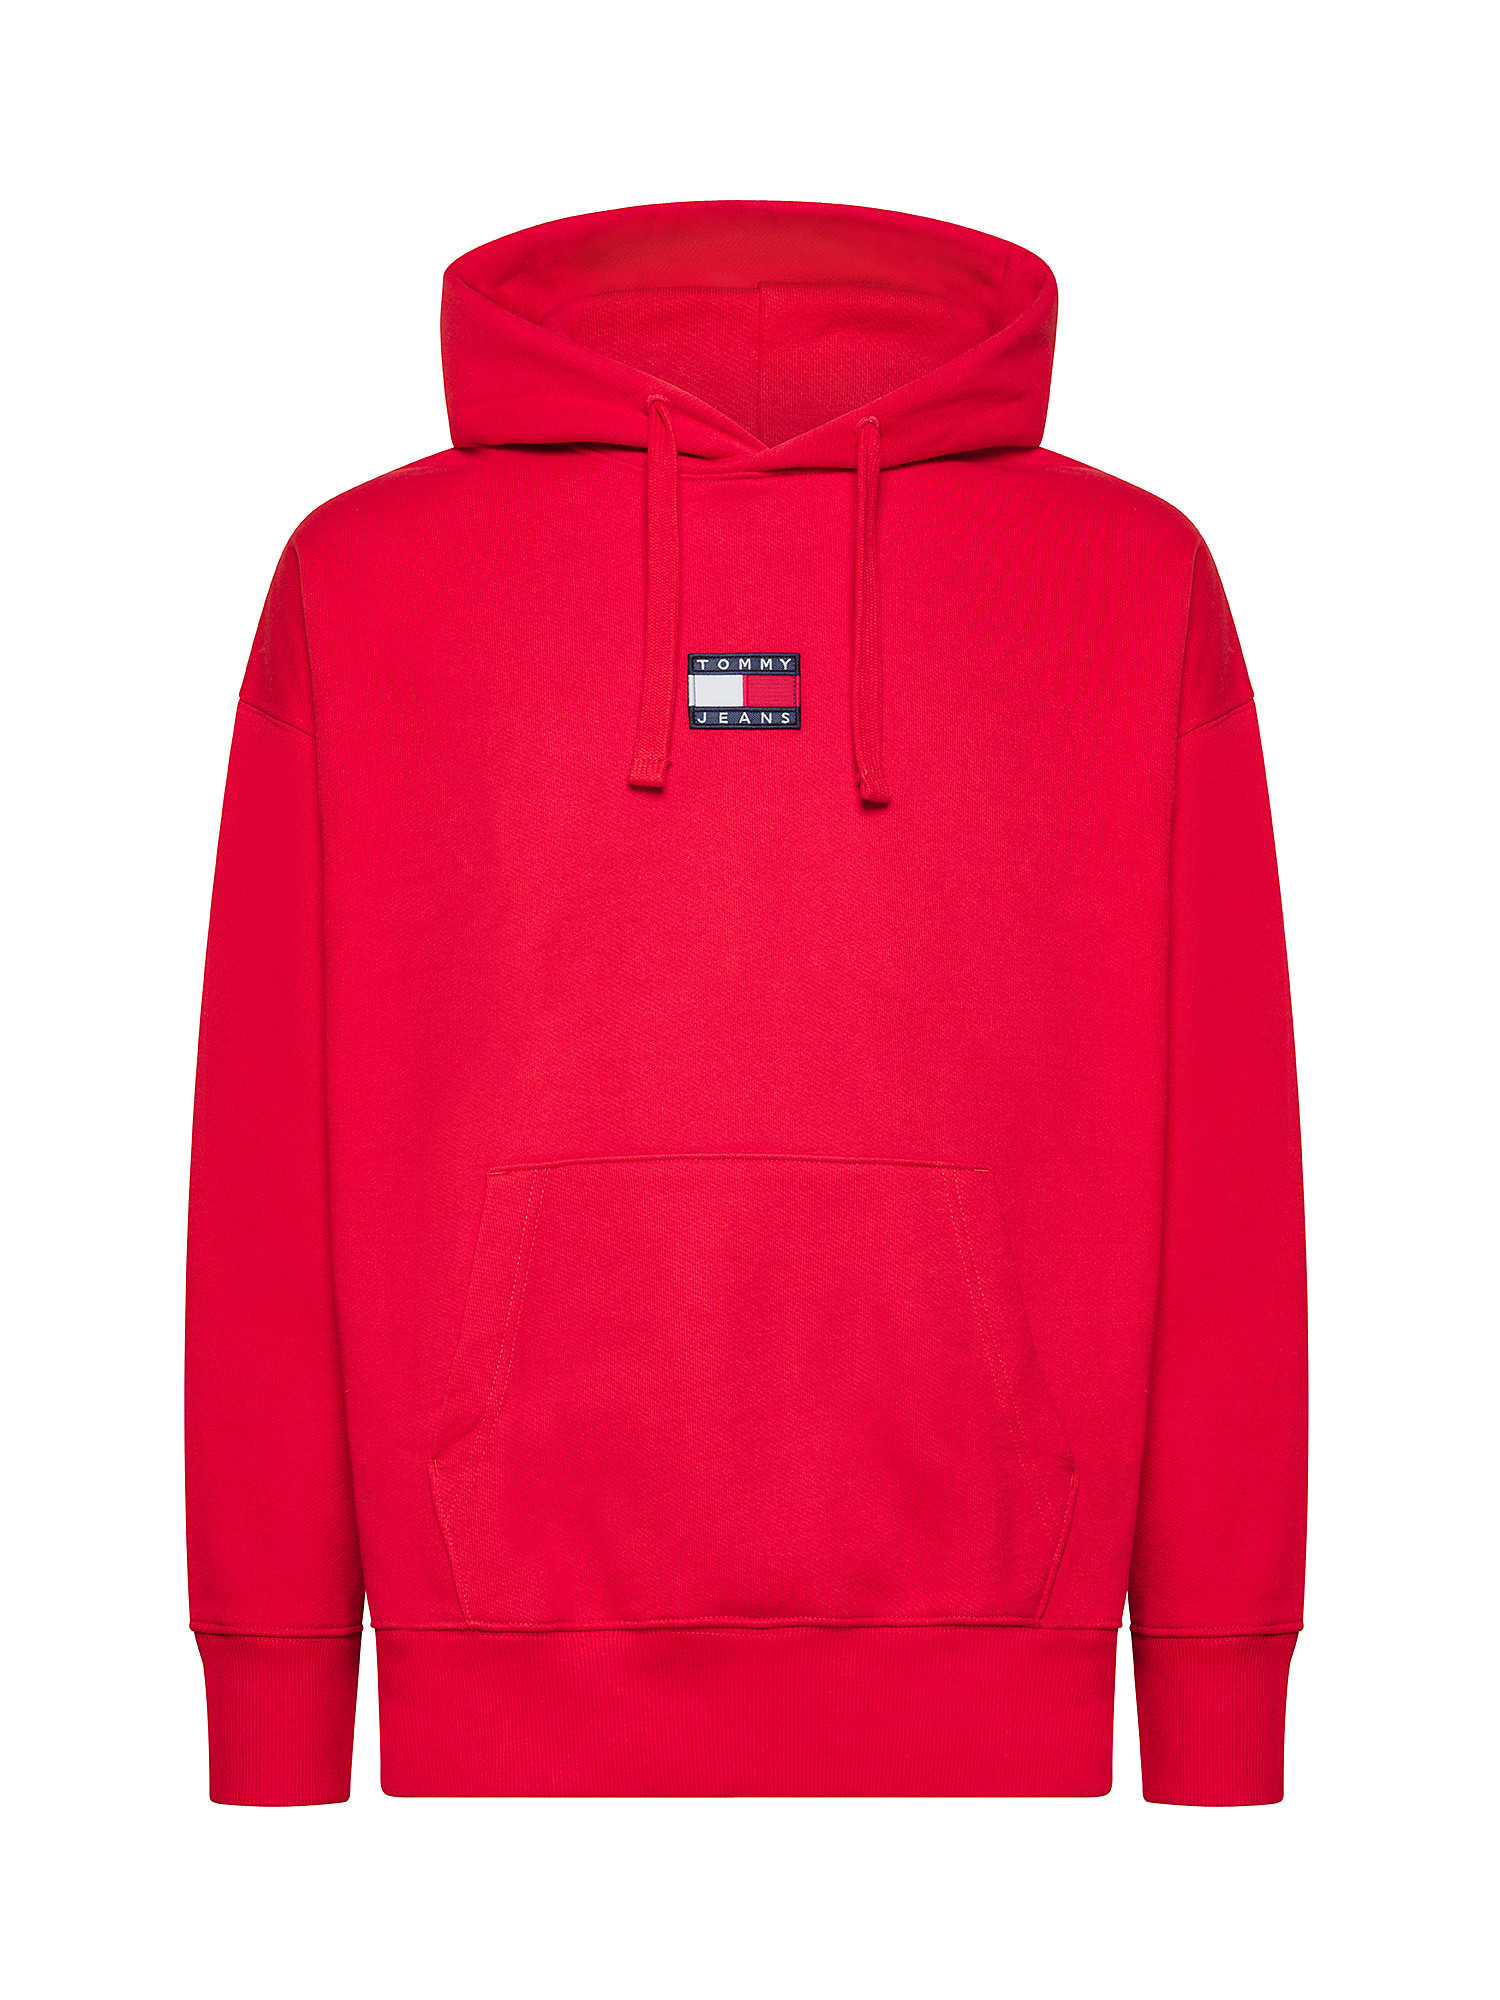 Tommy Jeans - Cotton hooded sweatshirt with micrologo on the front, Red, large image number 0